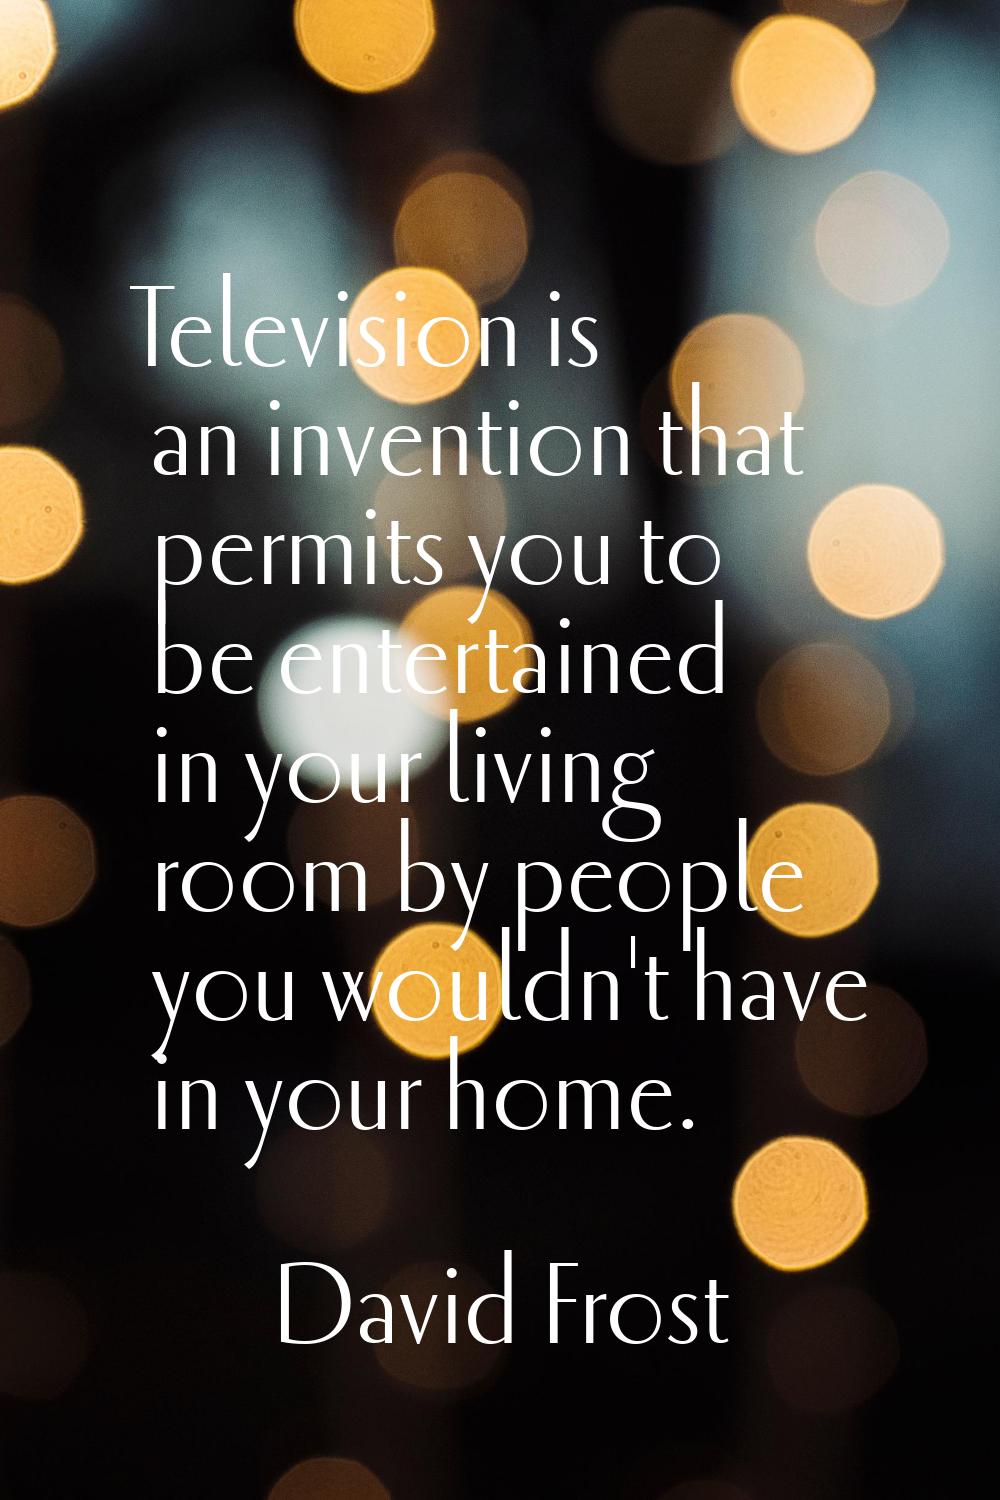 Television is an invention that permits you to be entertained in your living room by people you wou